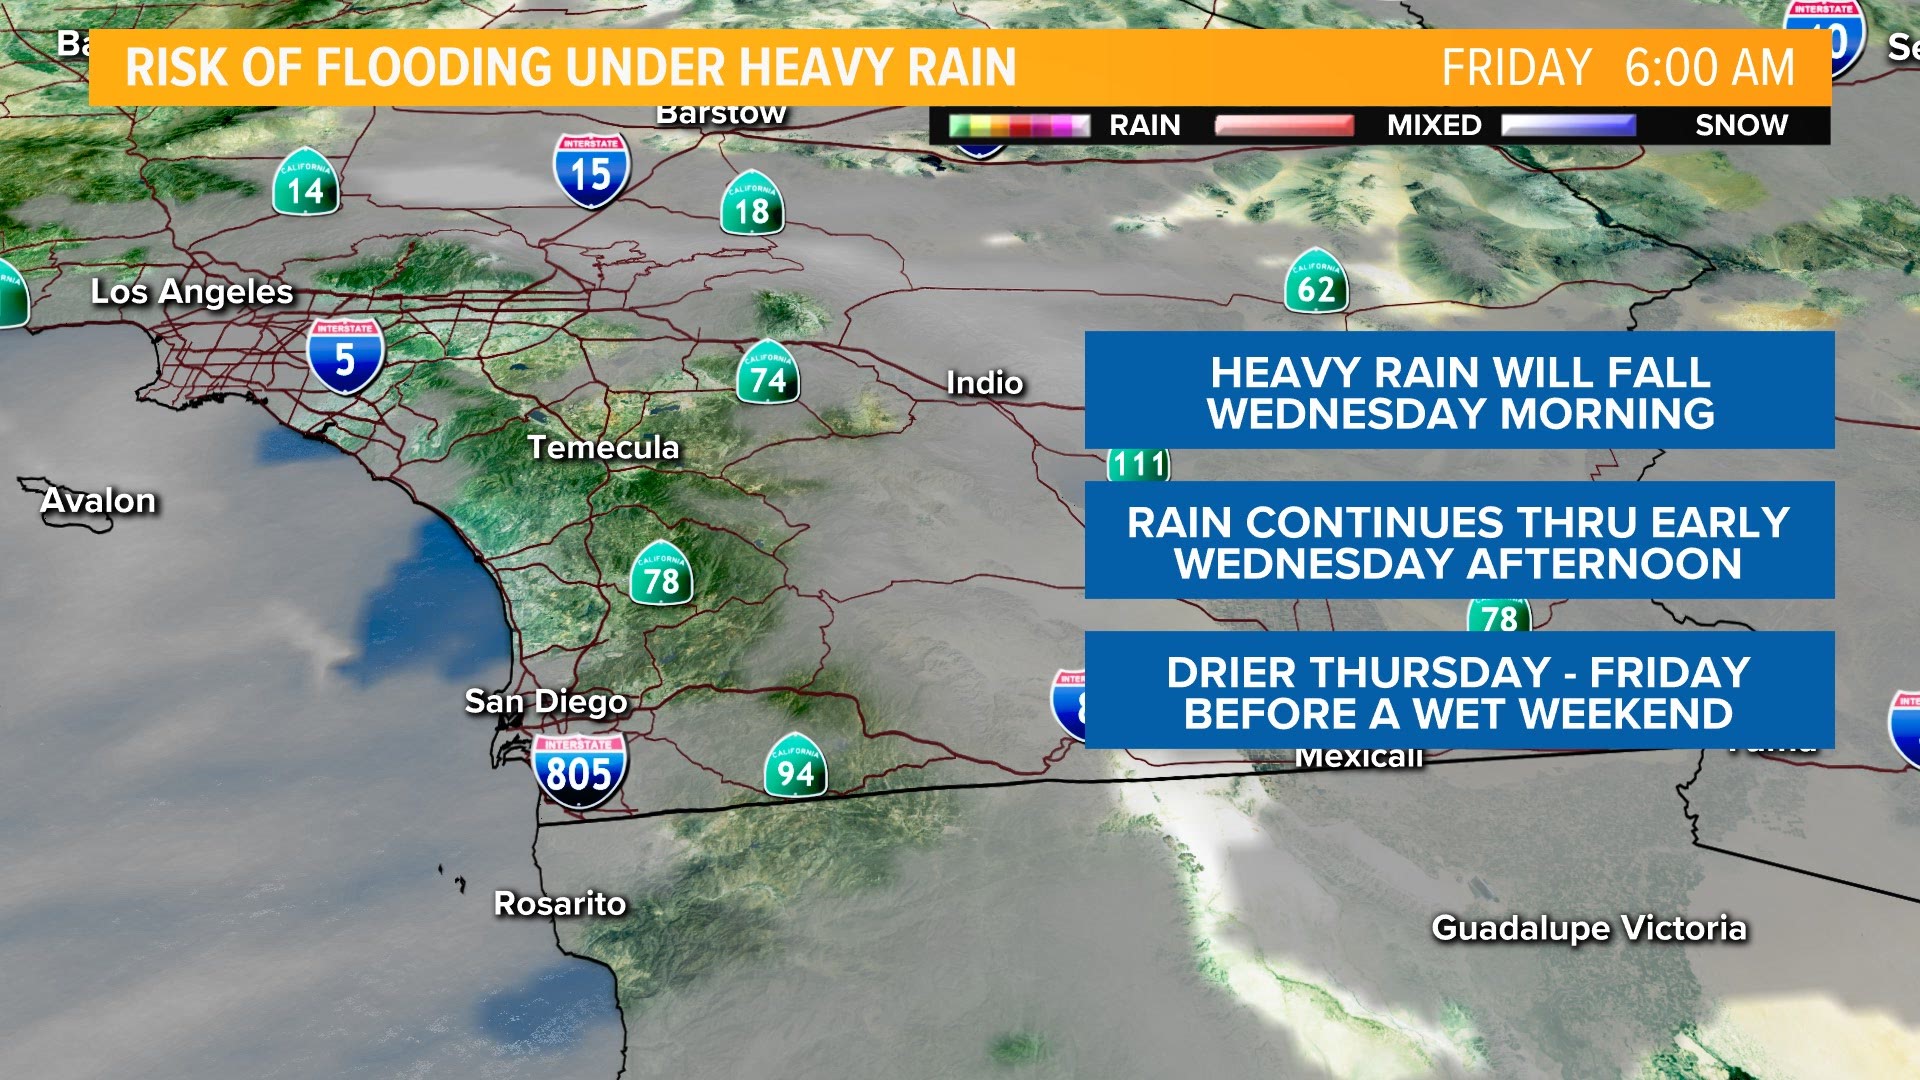 A Flash Flood Warning has been issued that will be in effect from 6 a.m. through Wednesday afternoon in the coastal and inland valley areas as well as the mountains.